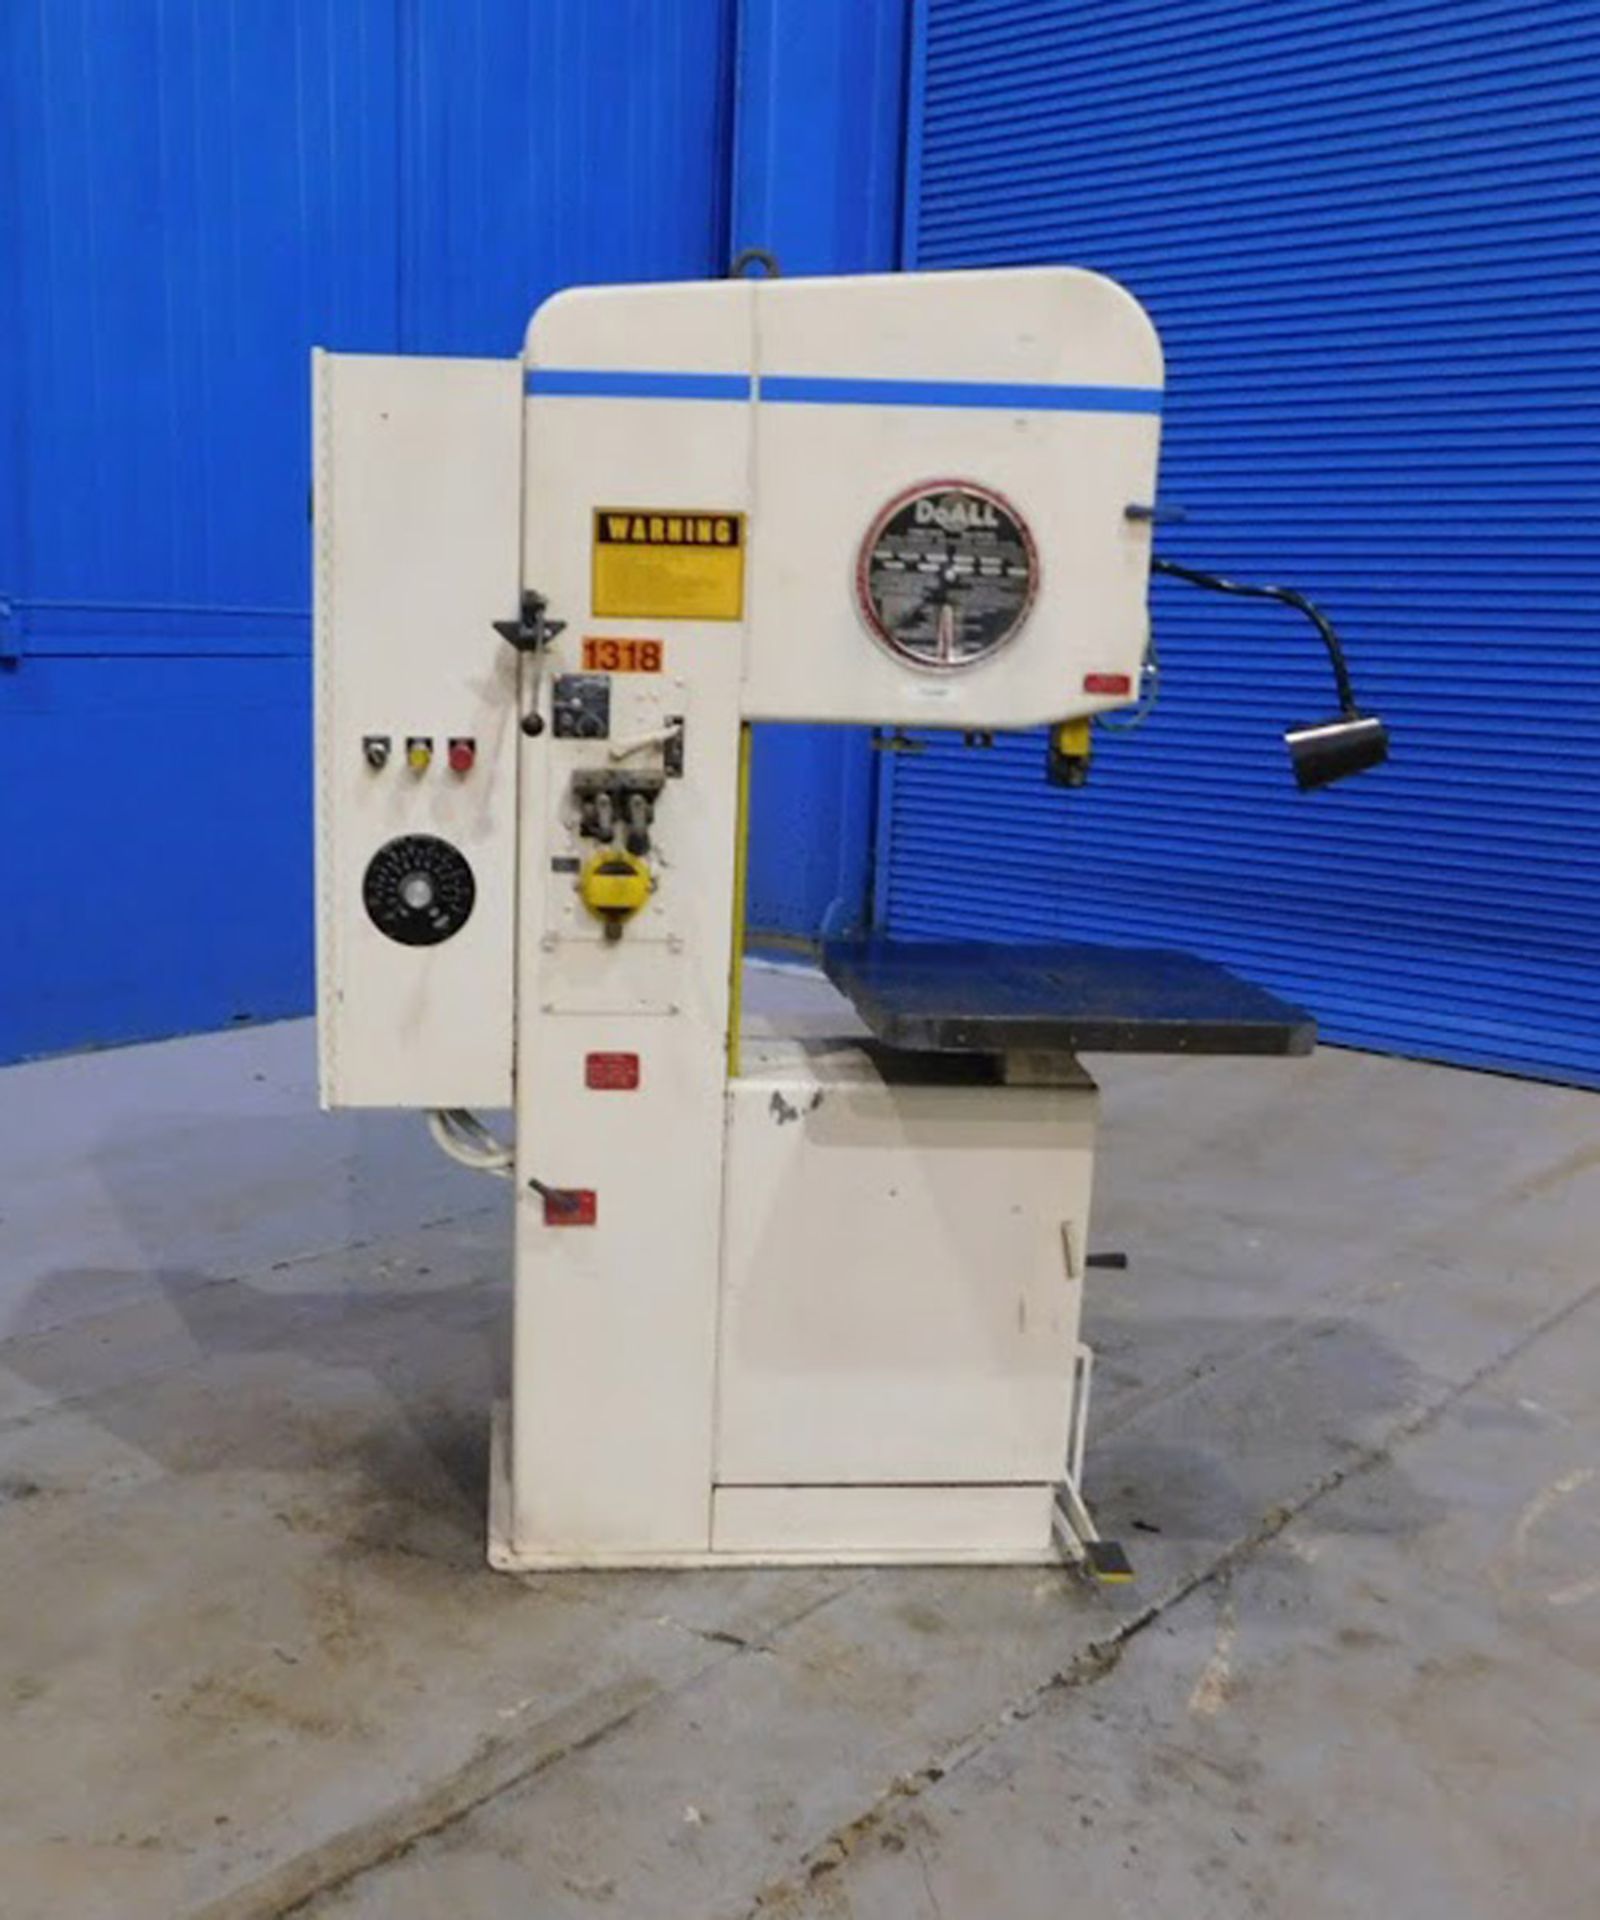 FREE LOADING - Located In: Painesville, OH - 1980 Doall Vertical Bandsaw, 20", Mdl: 2013- 20, S/N: